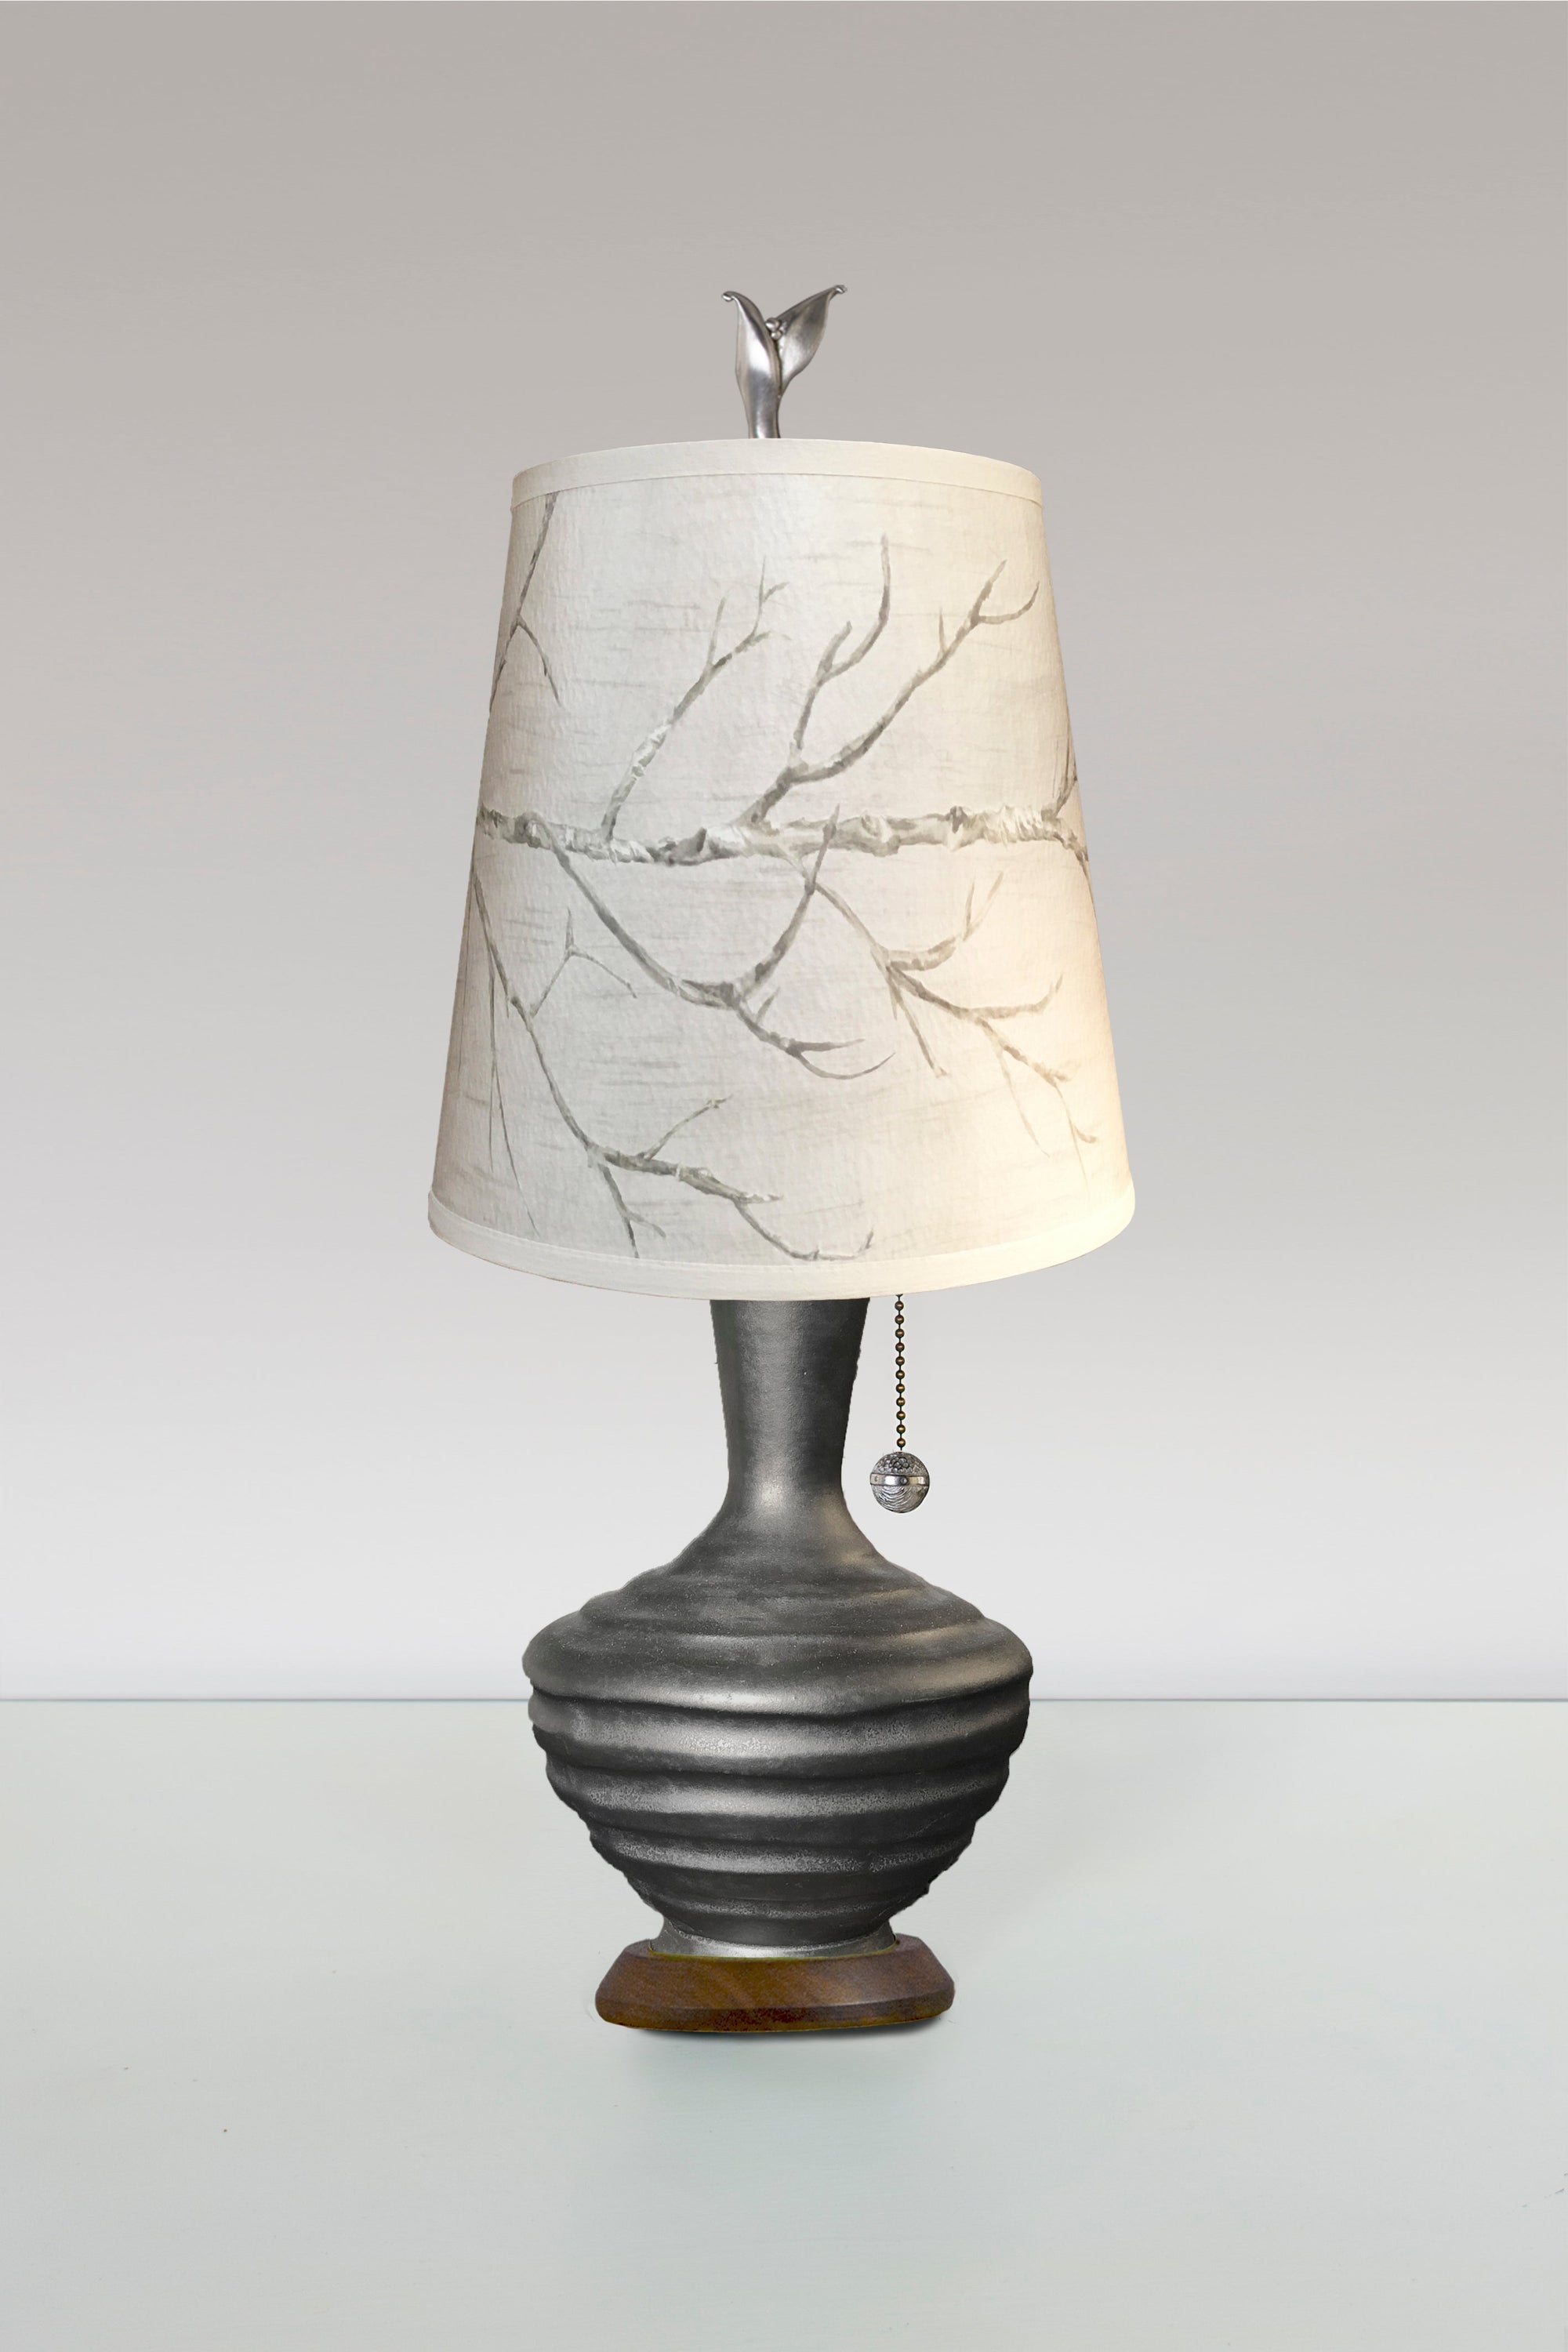 Janna Ugone & Co Table Lamps Ceramic Table Lamp with Small Drum Shade in Sweeping Branch